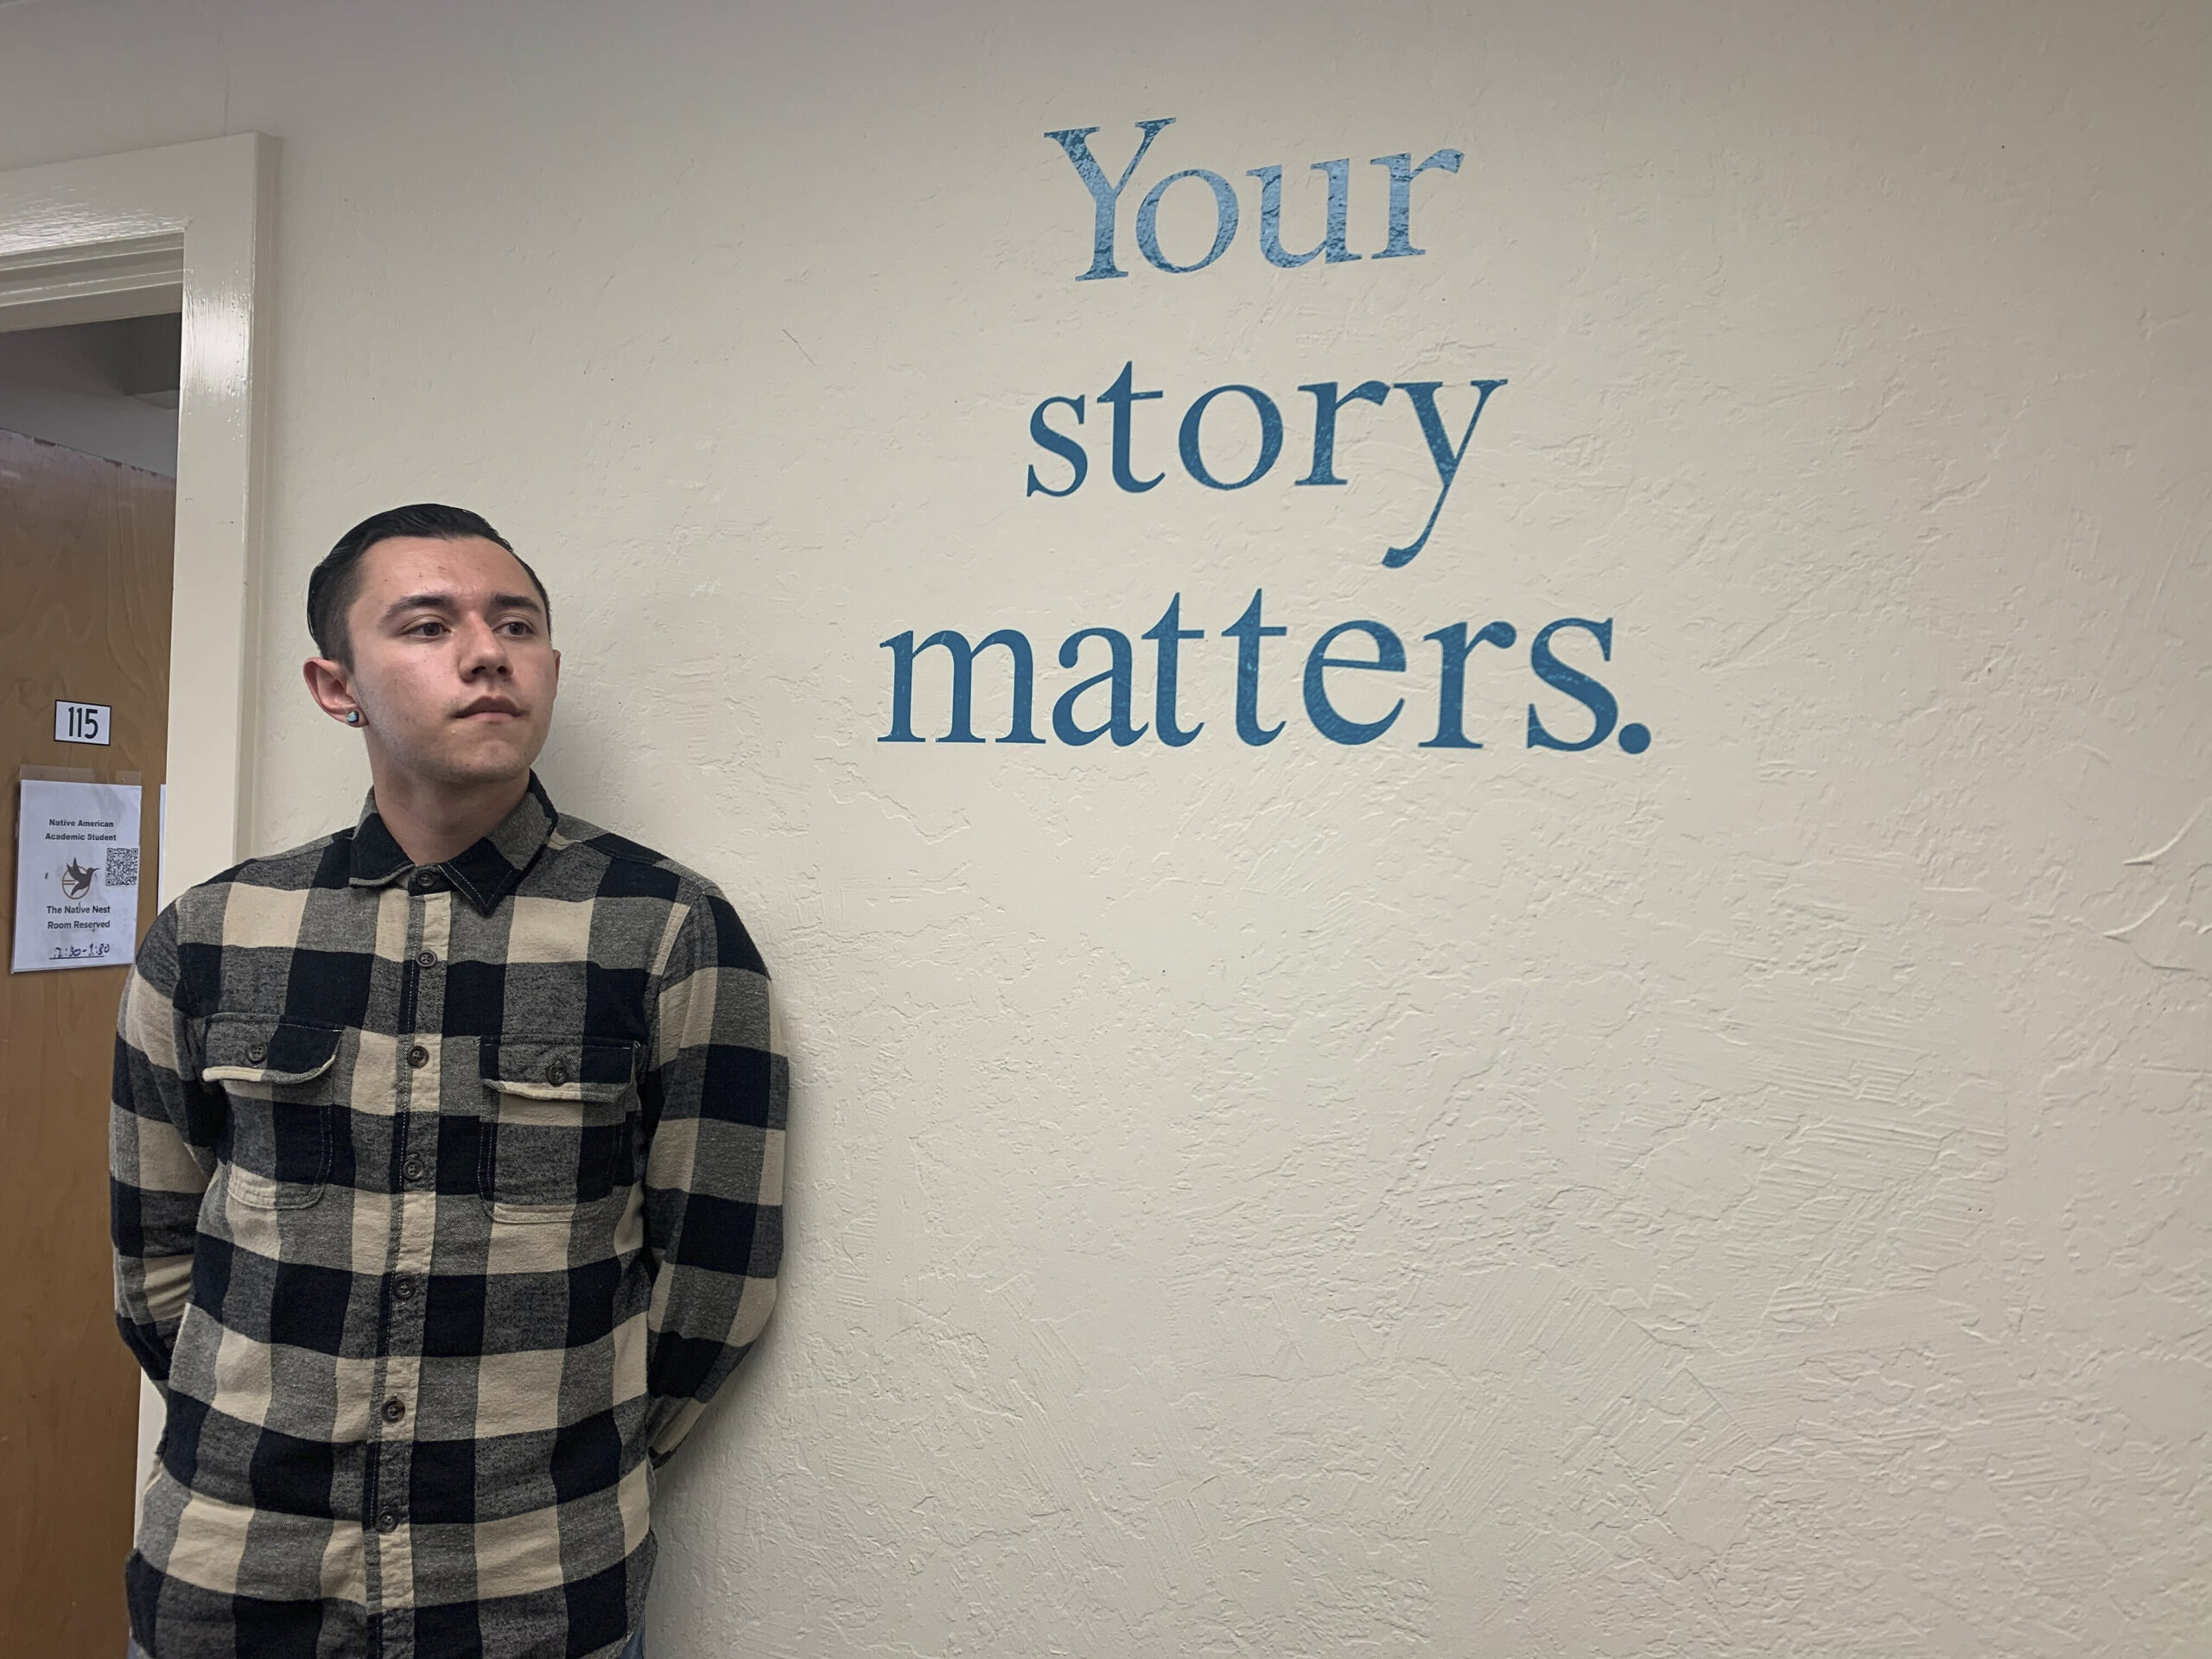 A young Cherokee man standing in front of the phrase “your story matters” that is painted on a white wall.